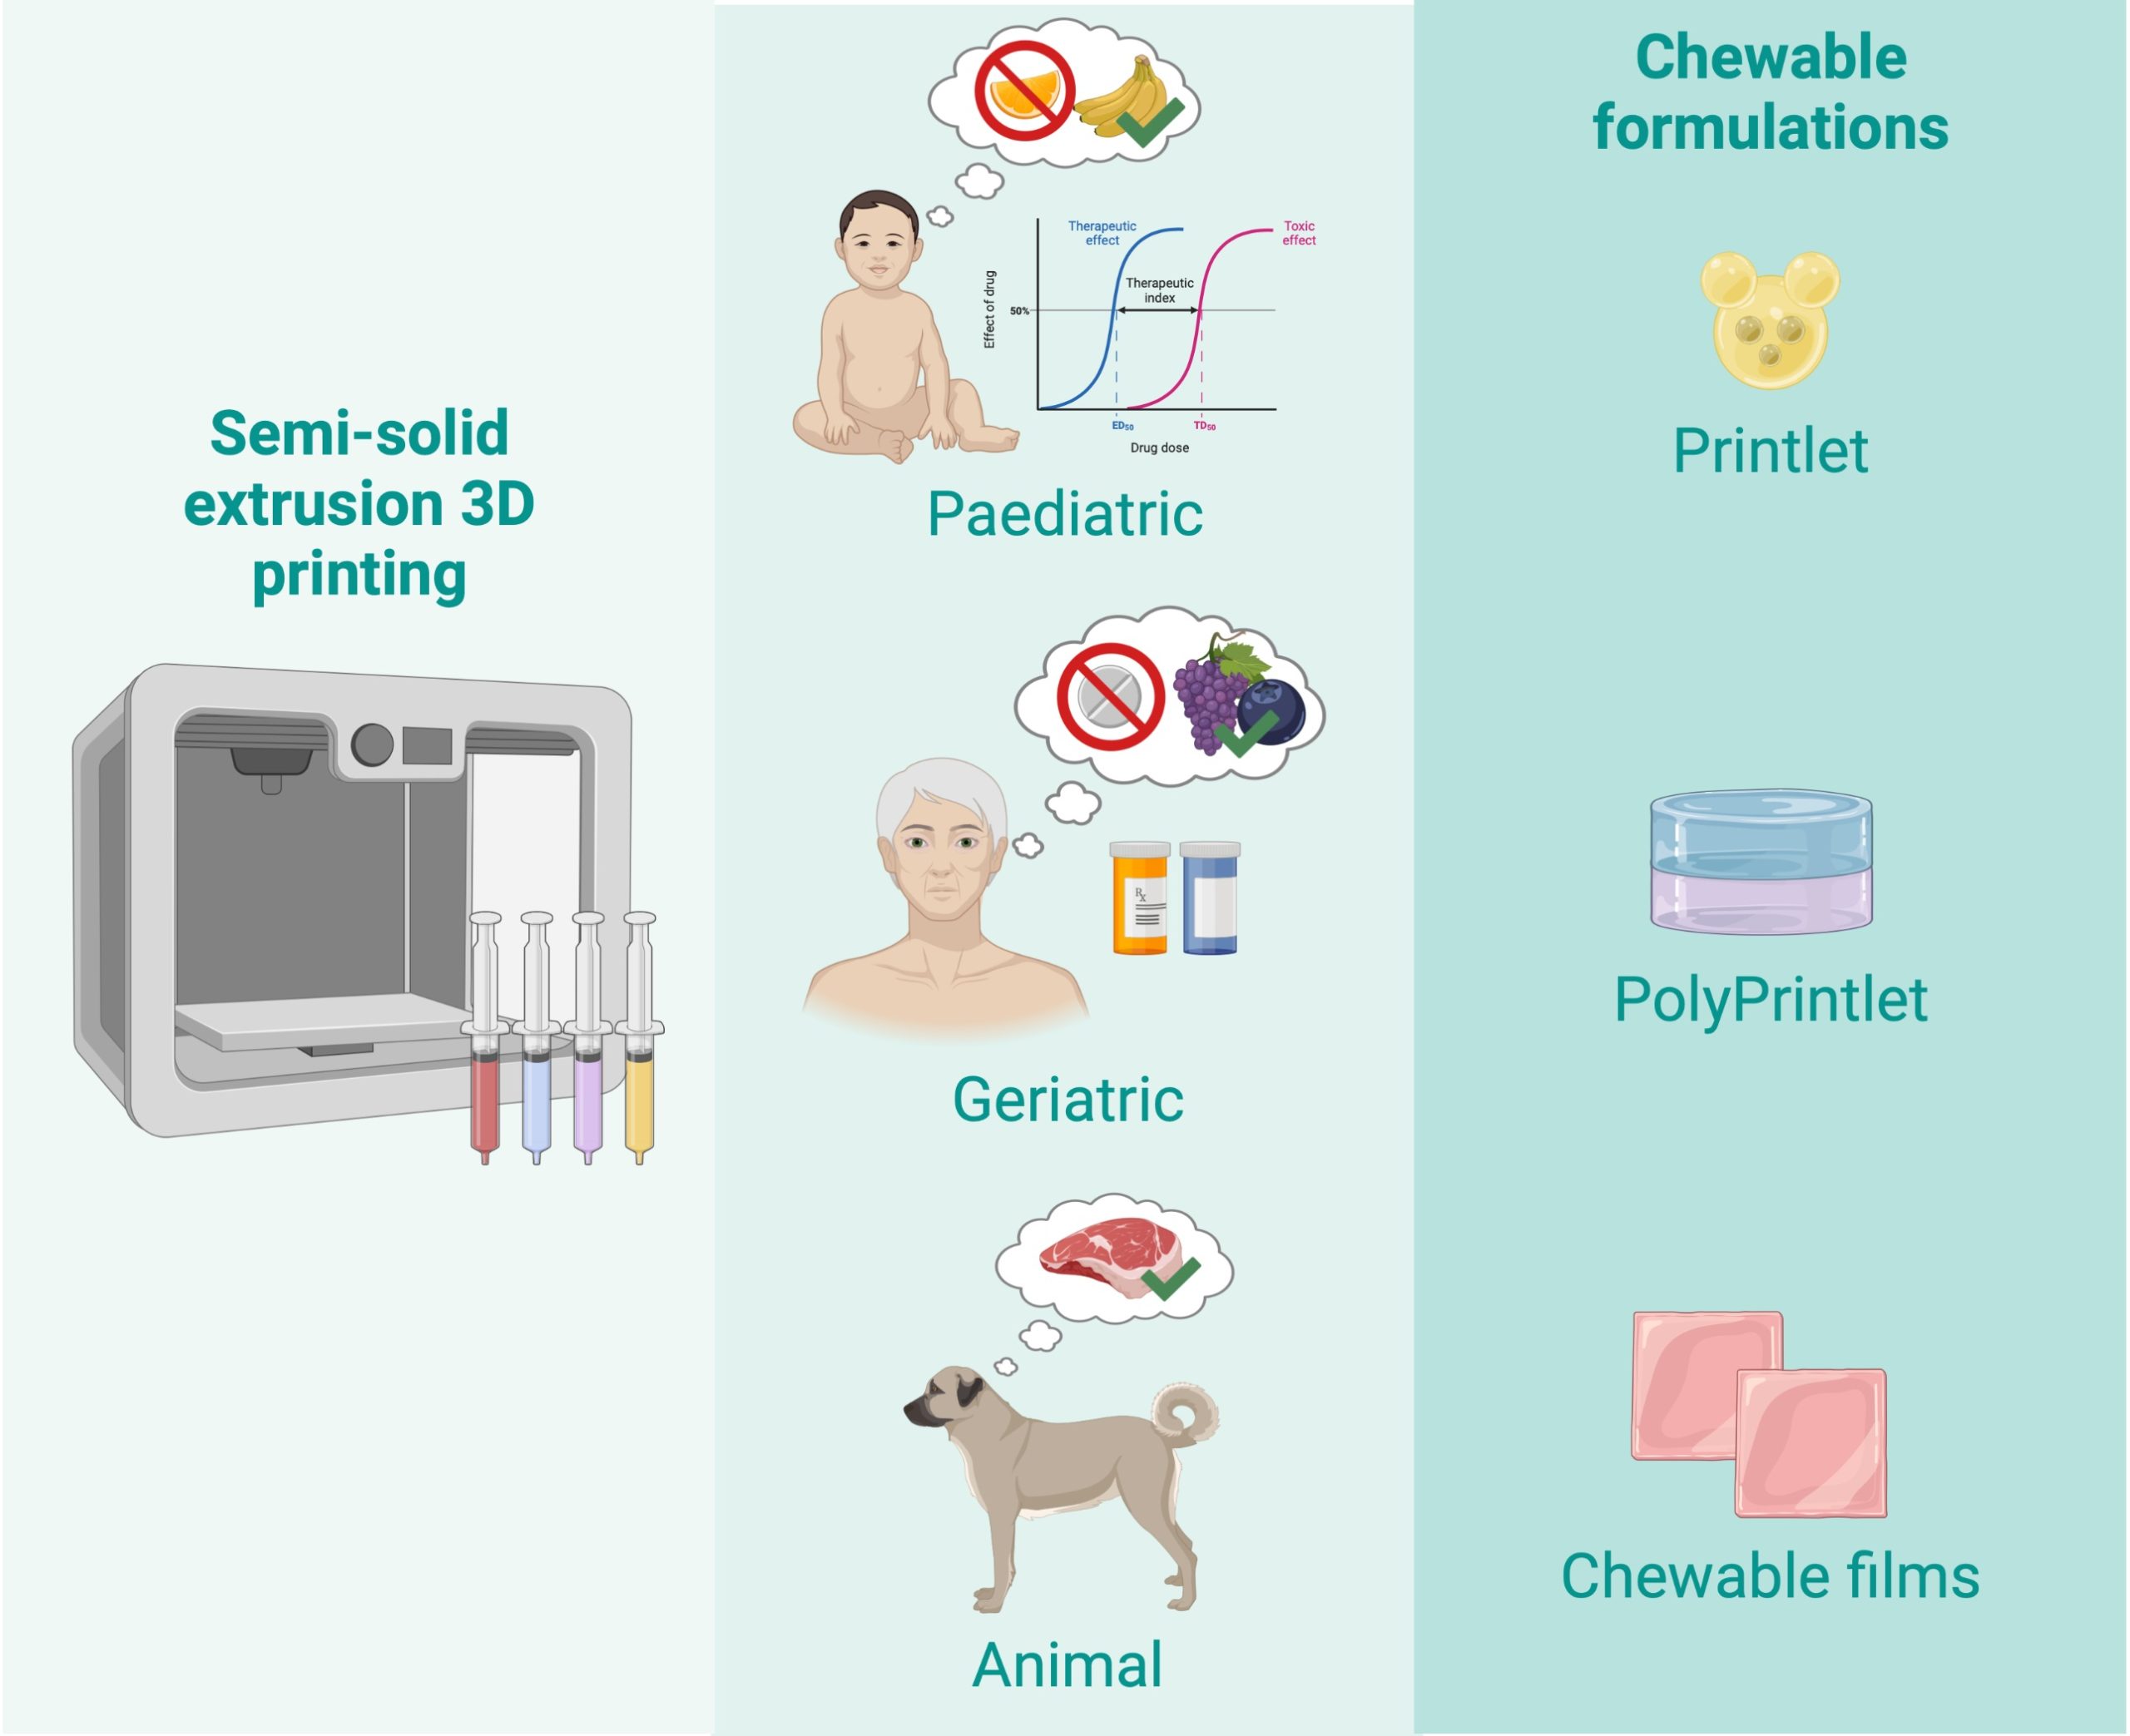 Innovations in Chewable Formulations: The Novelty and Applications of 3D Printing in Drug Product Design